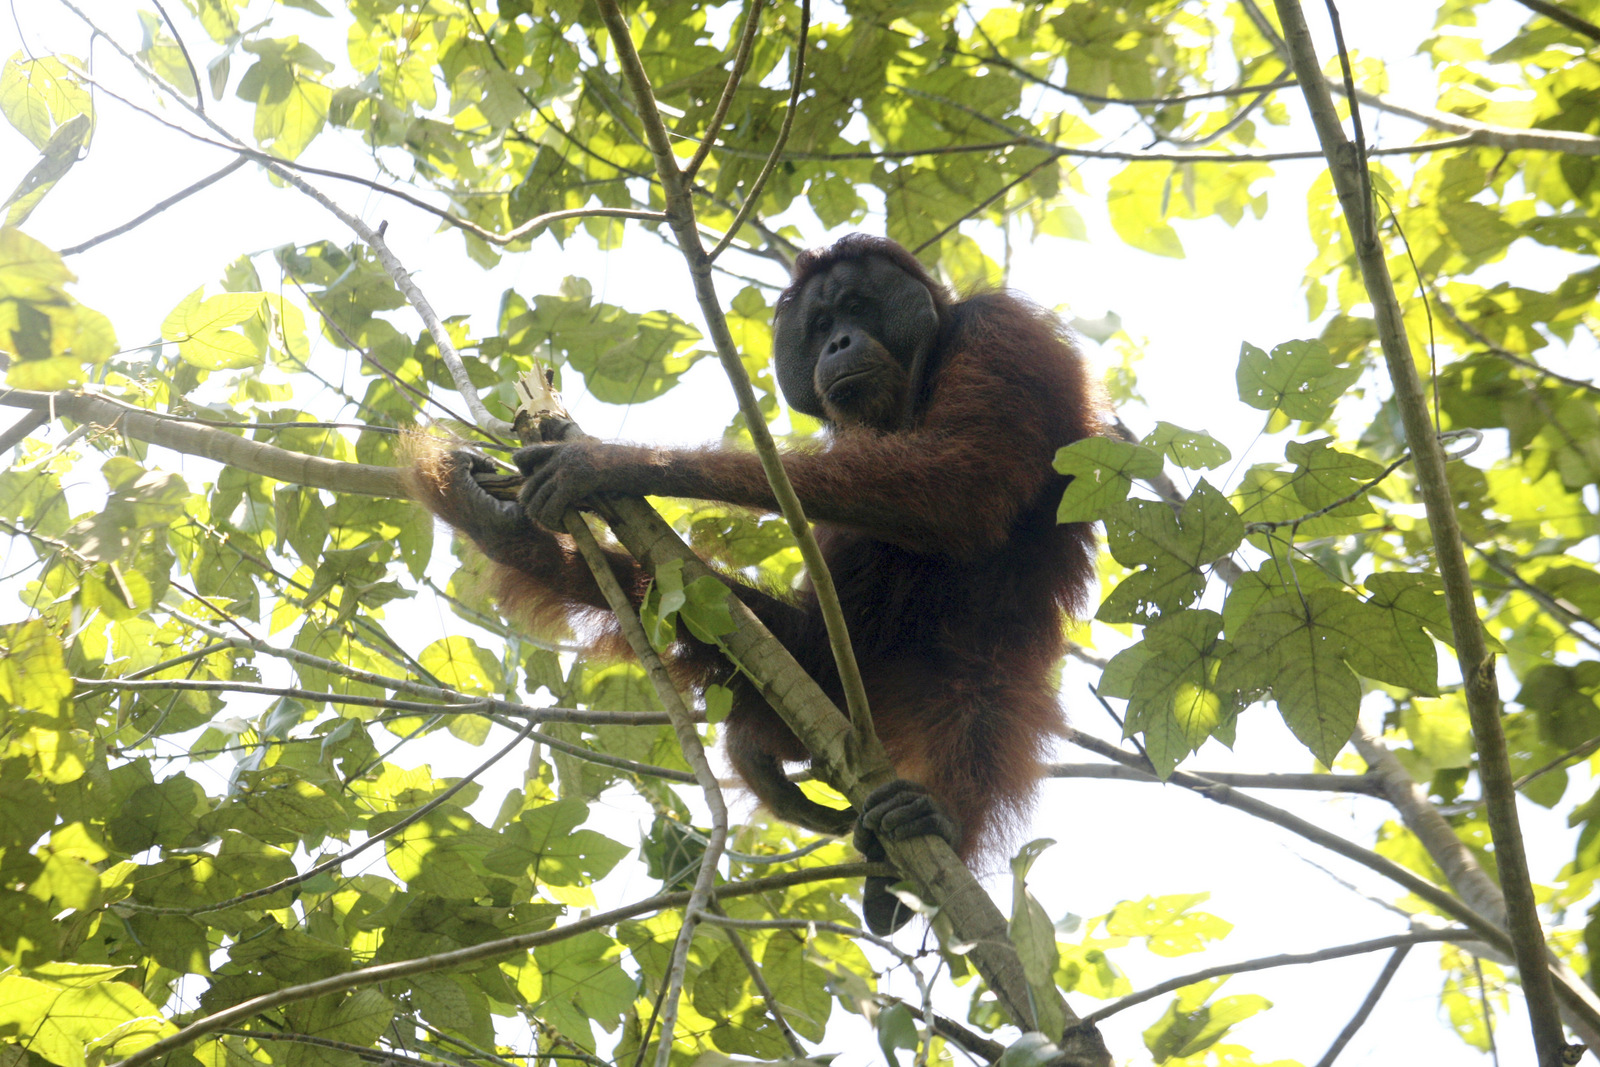 In this Thursday, Aug. 10, 2017 photo, an orangutan sits on the branch of a tree before being rescued and relocated from at a swath of destructed forest near a palm oil plantation at Tripa peat swamp in Aceh province, Indonesia. As demand for palm oil soars, plantations are expanding and companies drain the swamp, clear the forest of its native trees, and often setting illegal fires which in turn robs orangutans and other endangered species of their habitats, leaving the animals marooned on small swaths of forest, boxed-in on all sides by plantations. (AP Photo/Binsar Bakkara)